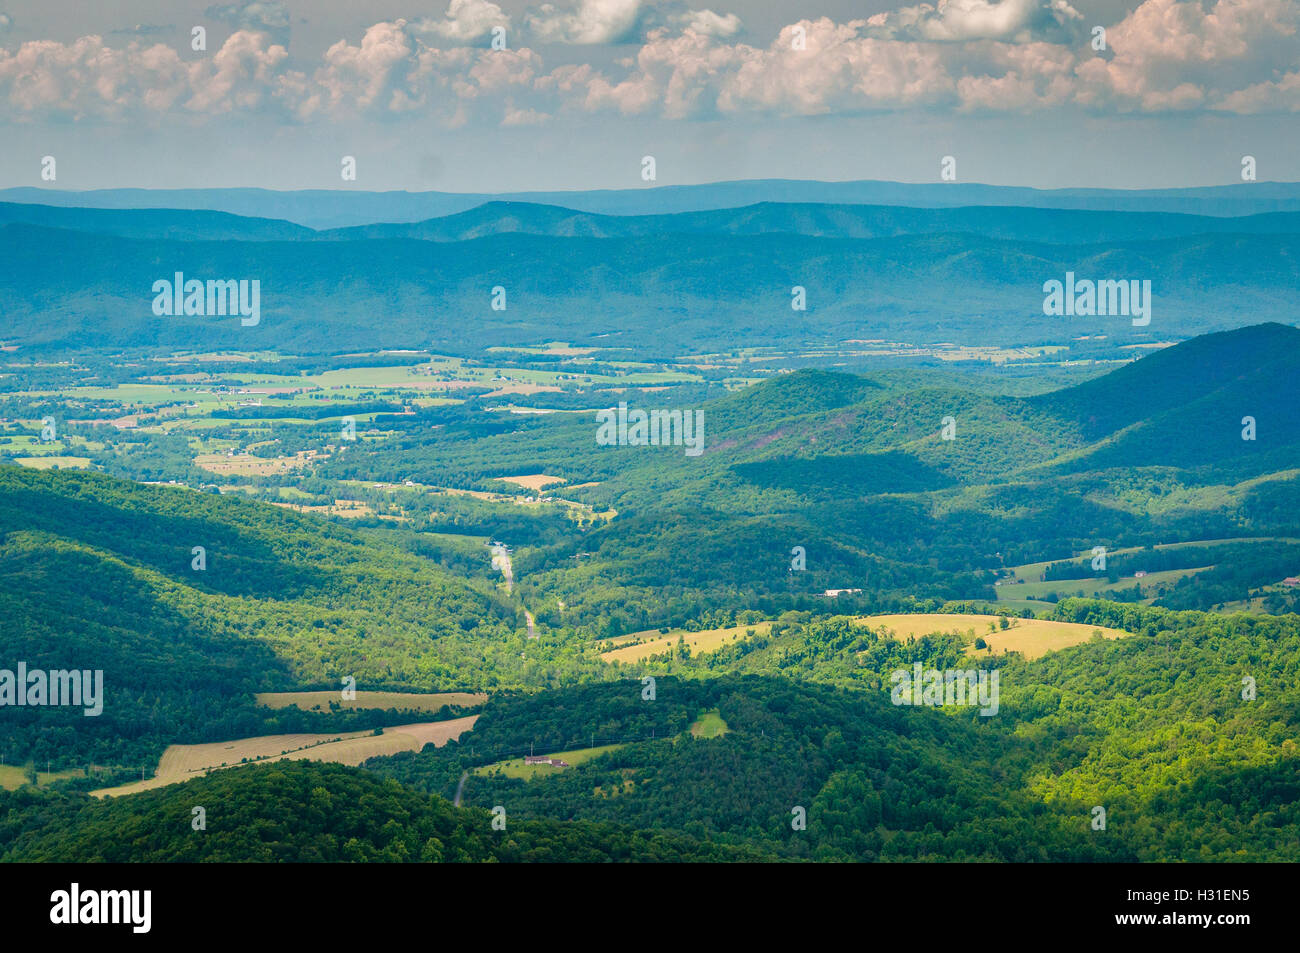 View of the Shenandoah Valley from Skyline Drive, in Shenandoah National Park, Virginia. Stock Photo